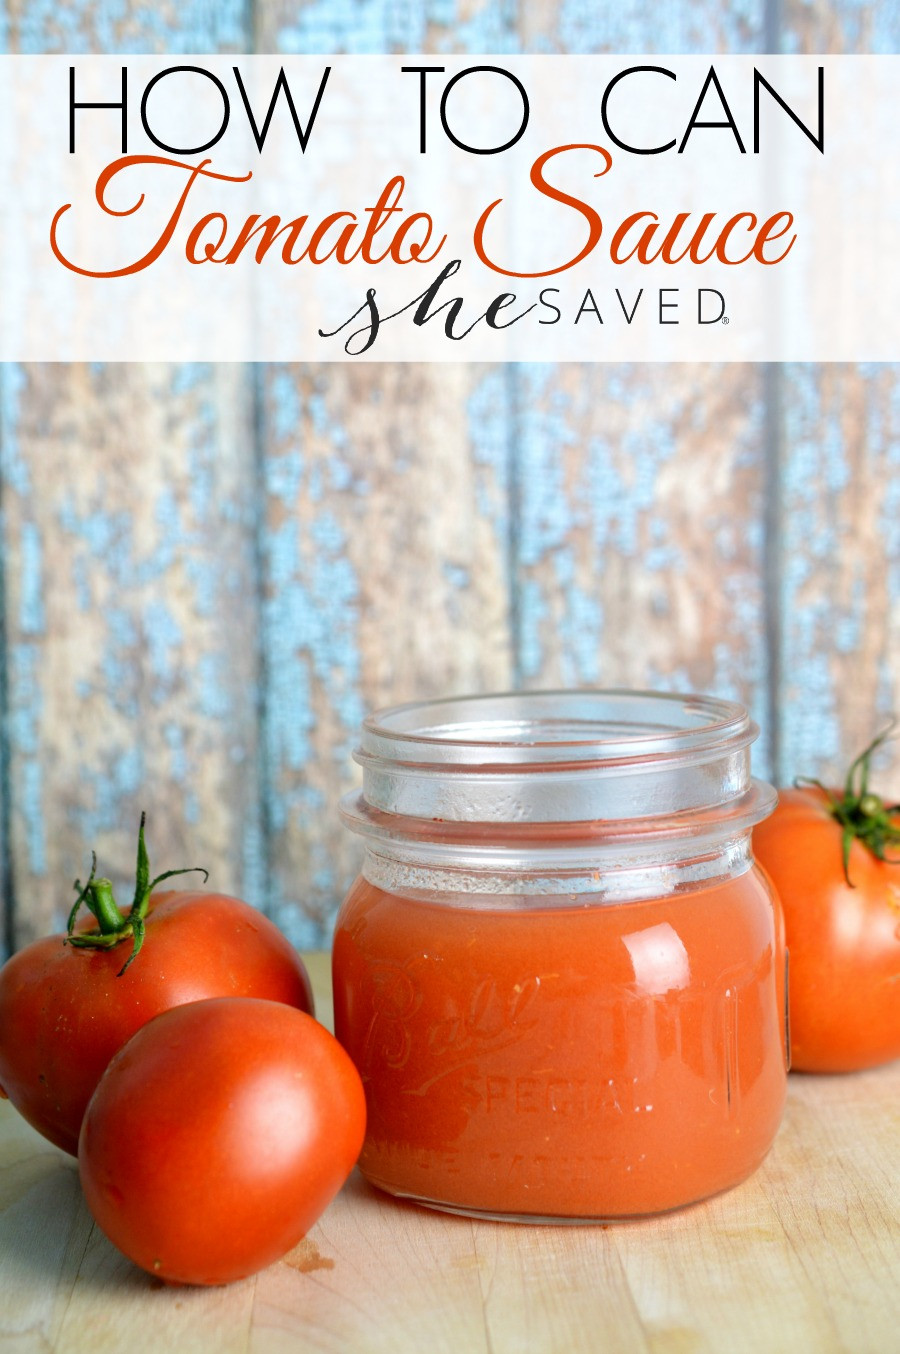 How To Can Tomato Sauce
 How to Can Tomato Sauce or Tomato Juice She Saved